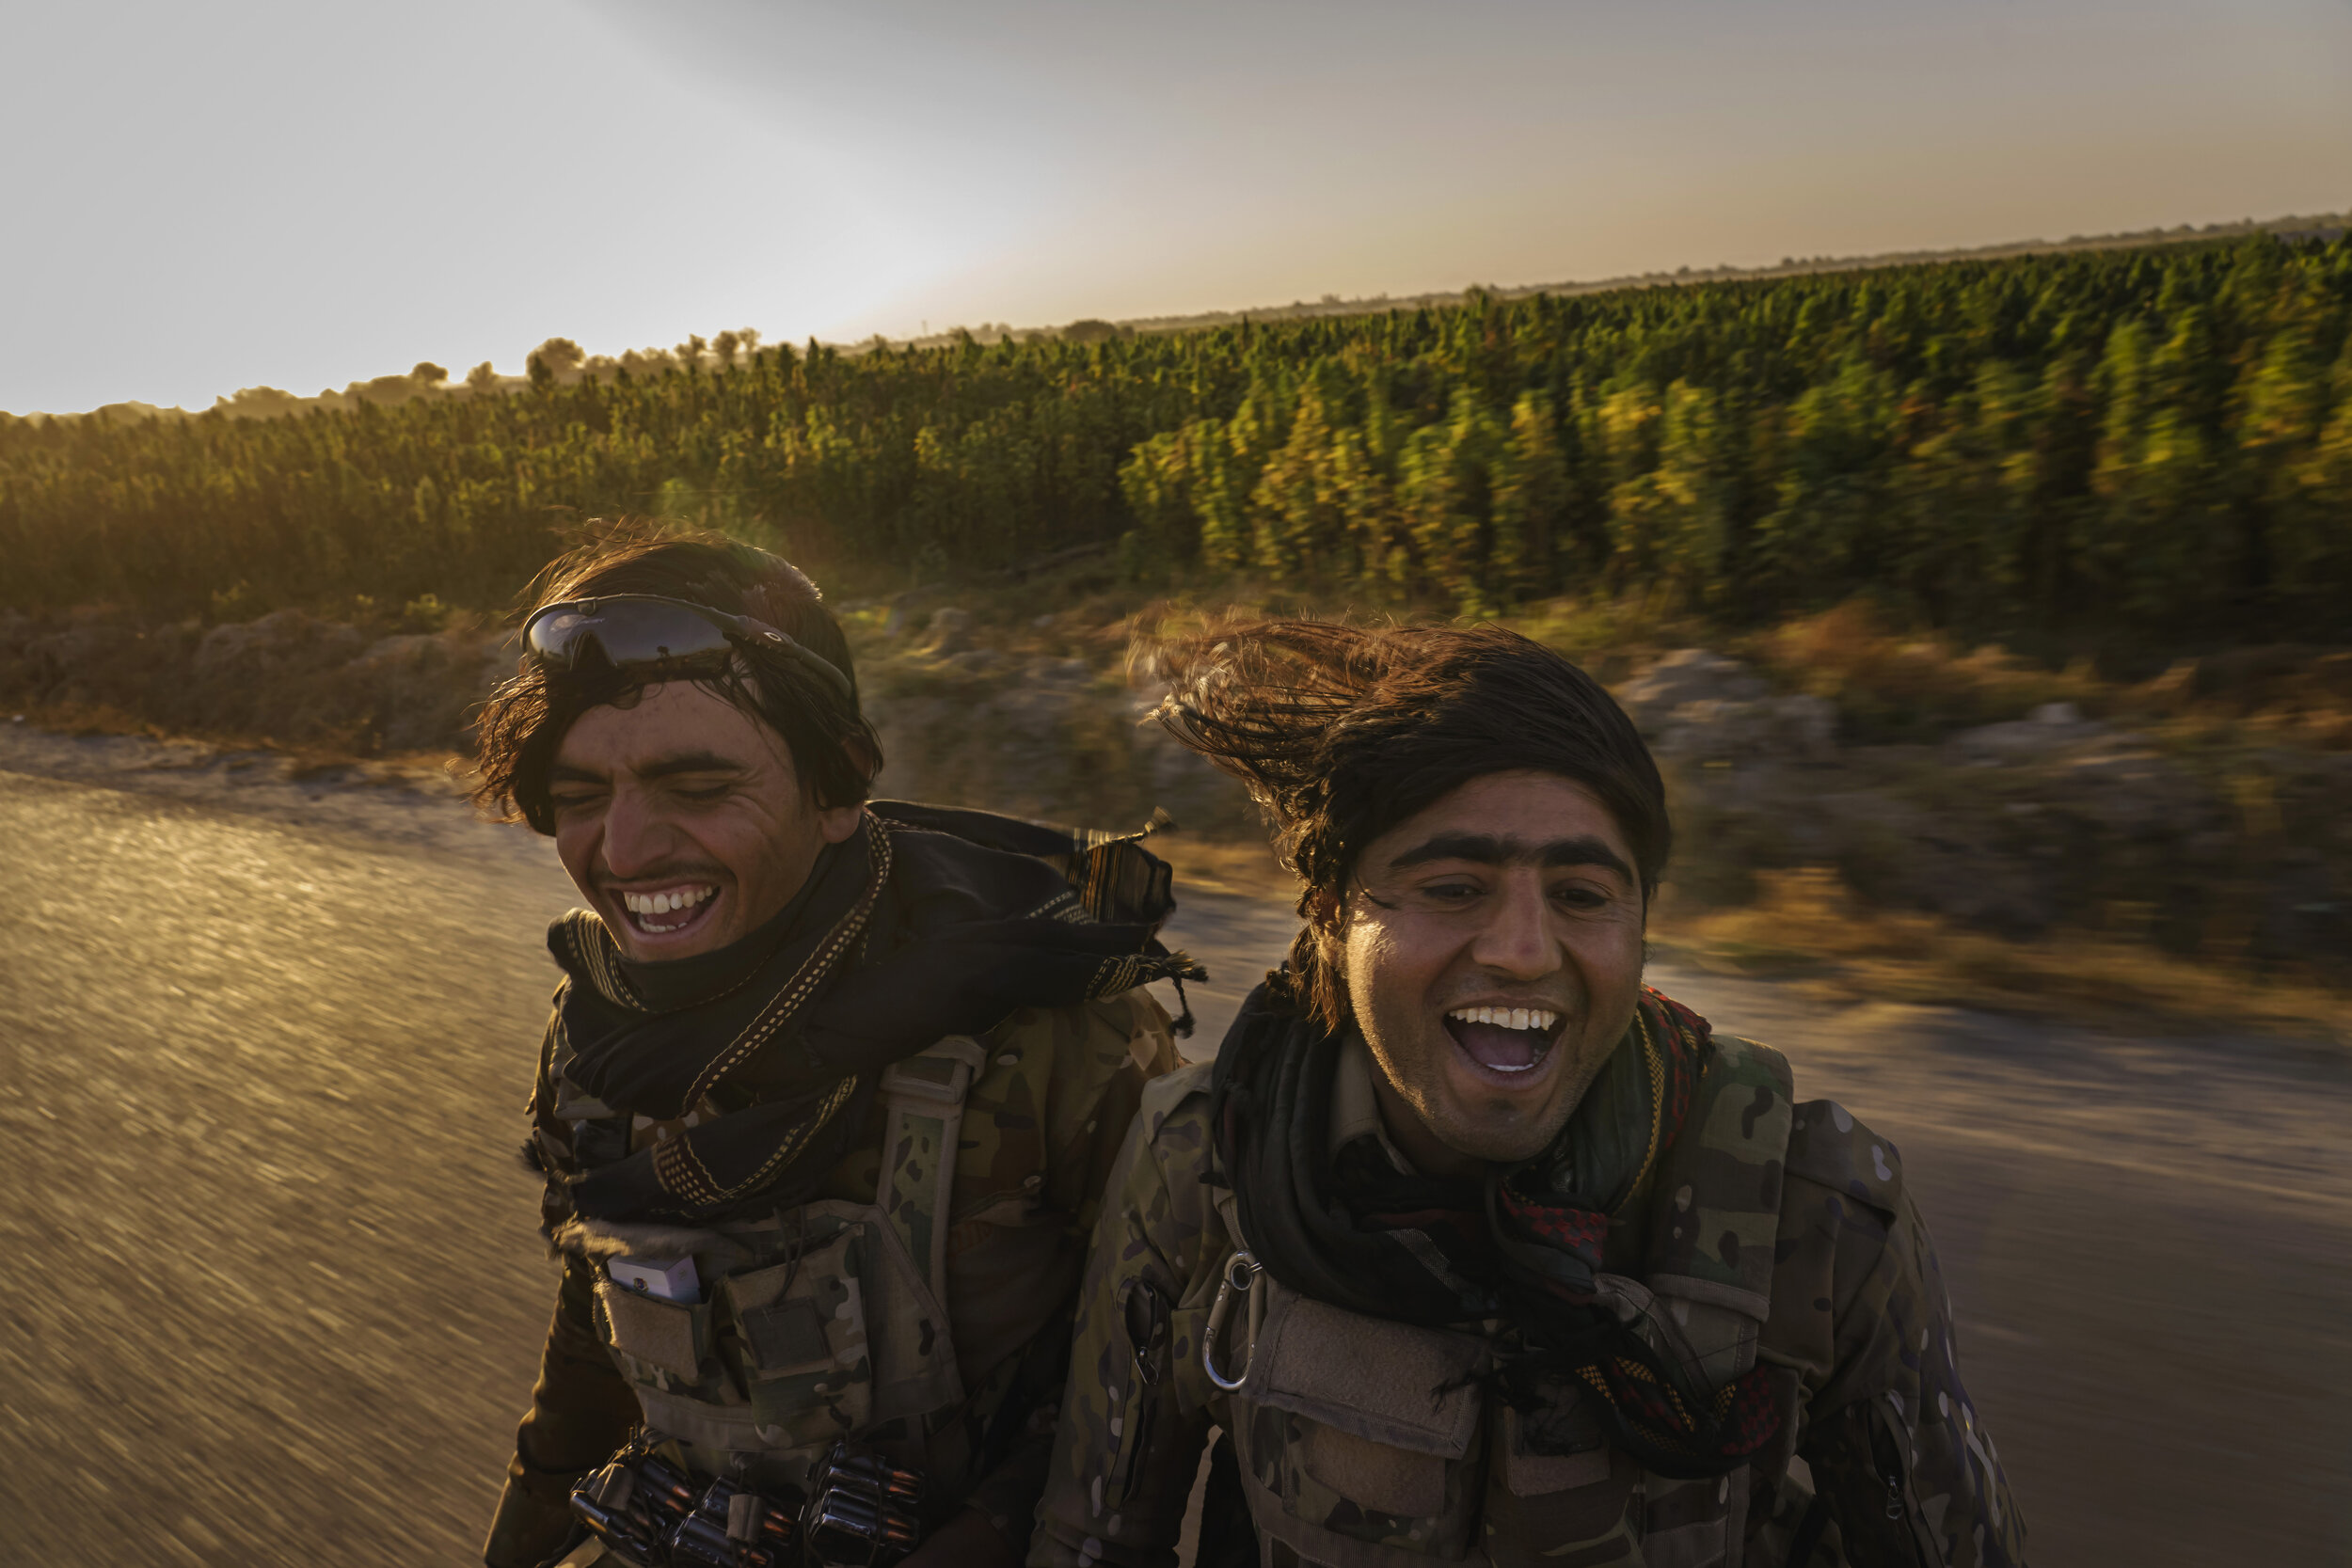  As they roared through villages, past shoulder-high cannabis stalks that filling the air with a sweet fragrance, Hazrat Bilal, 24, right, and other Afghan National Police officers sing a somber melody as they patrol the Panjwai district outside of K